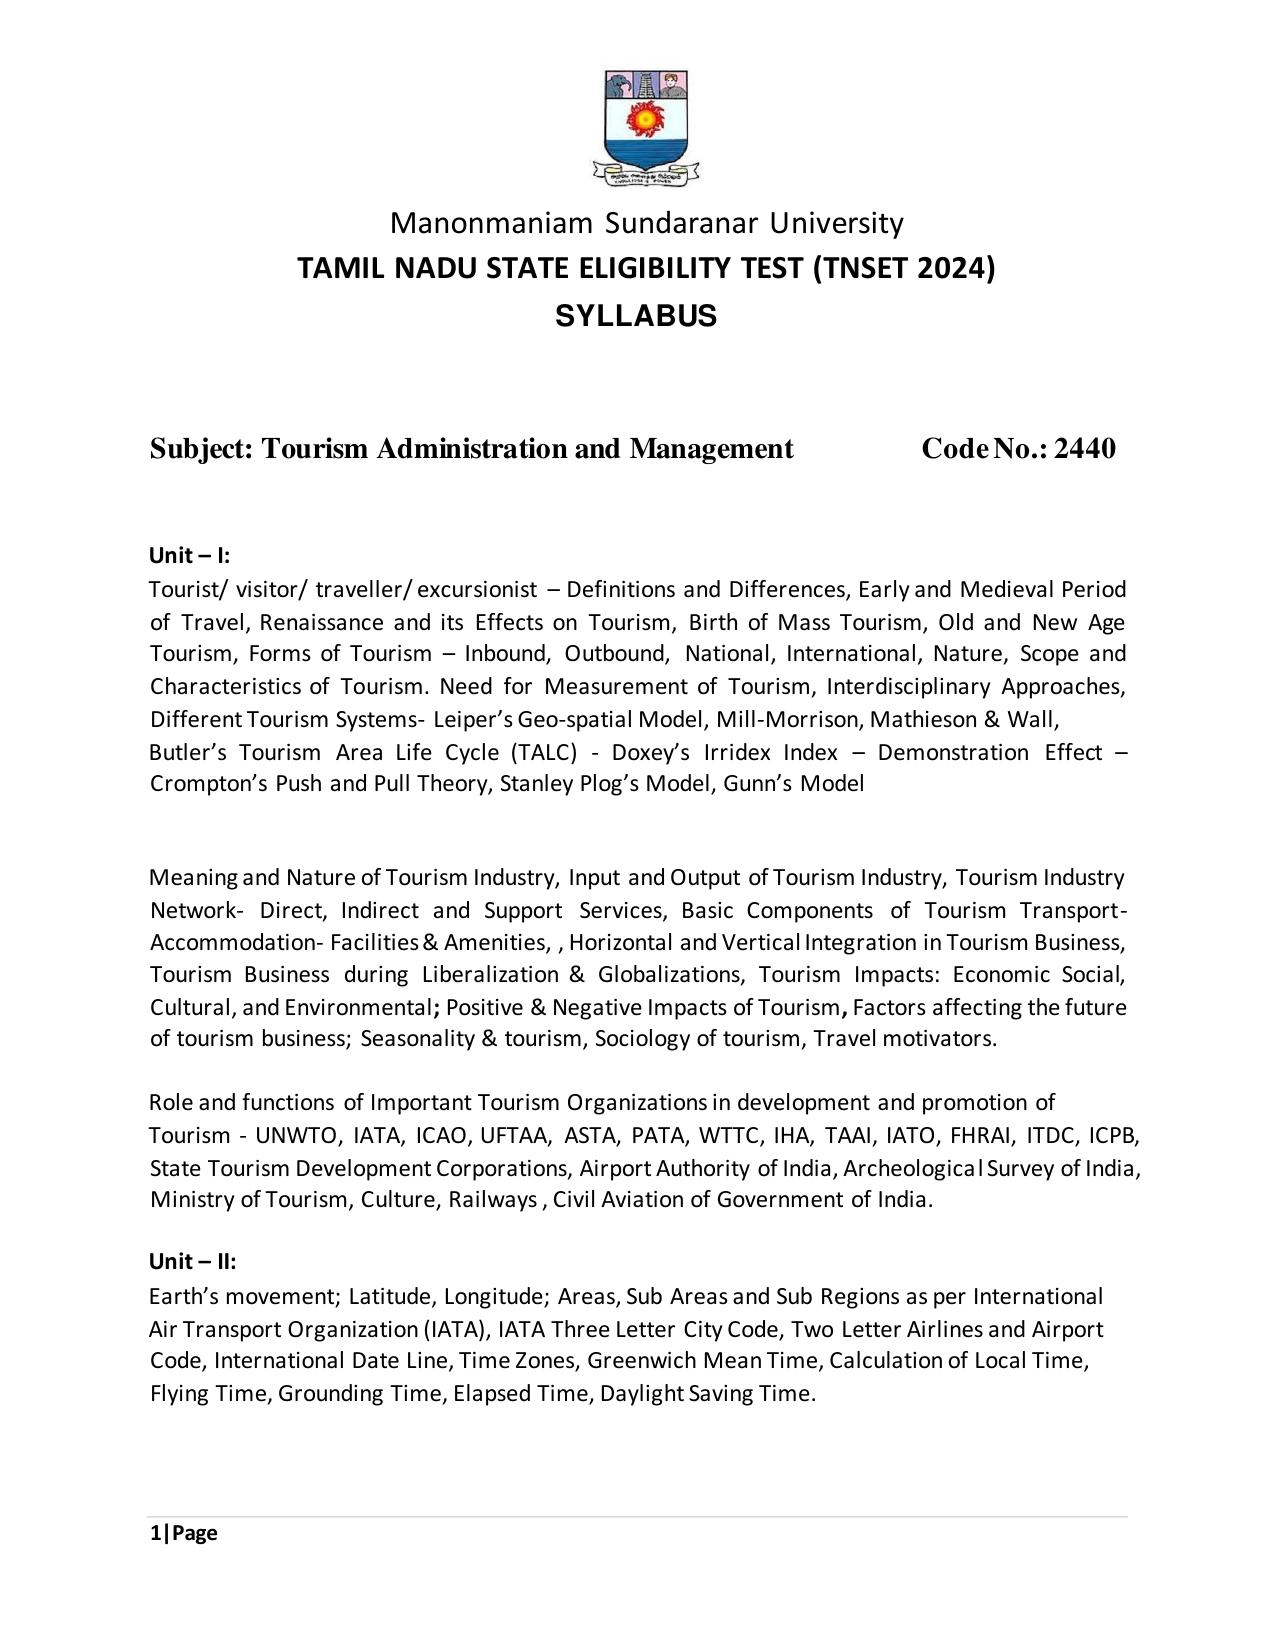 TNSET Syllabus - Tourism Administration and Management - Page 1